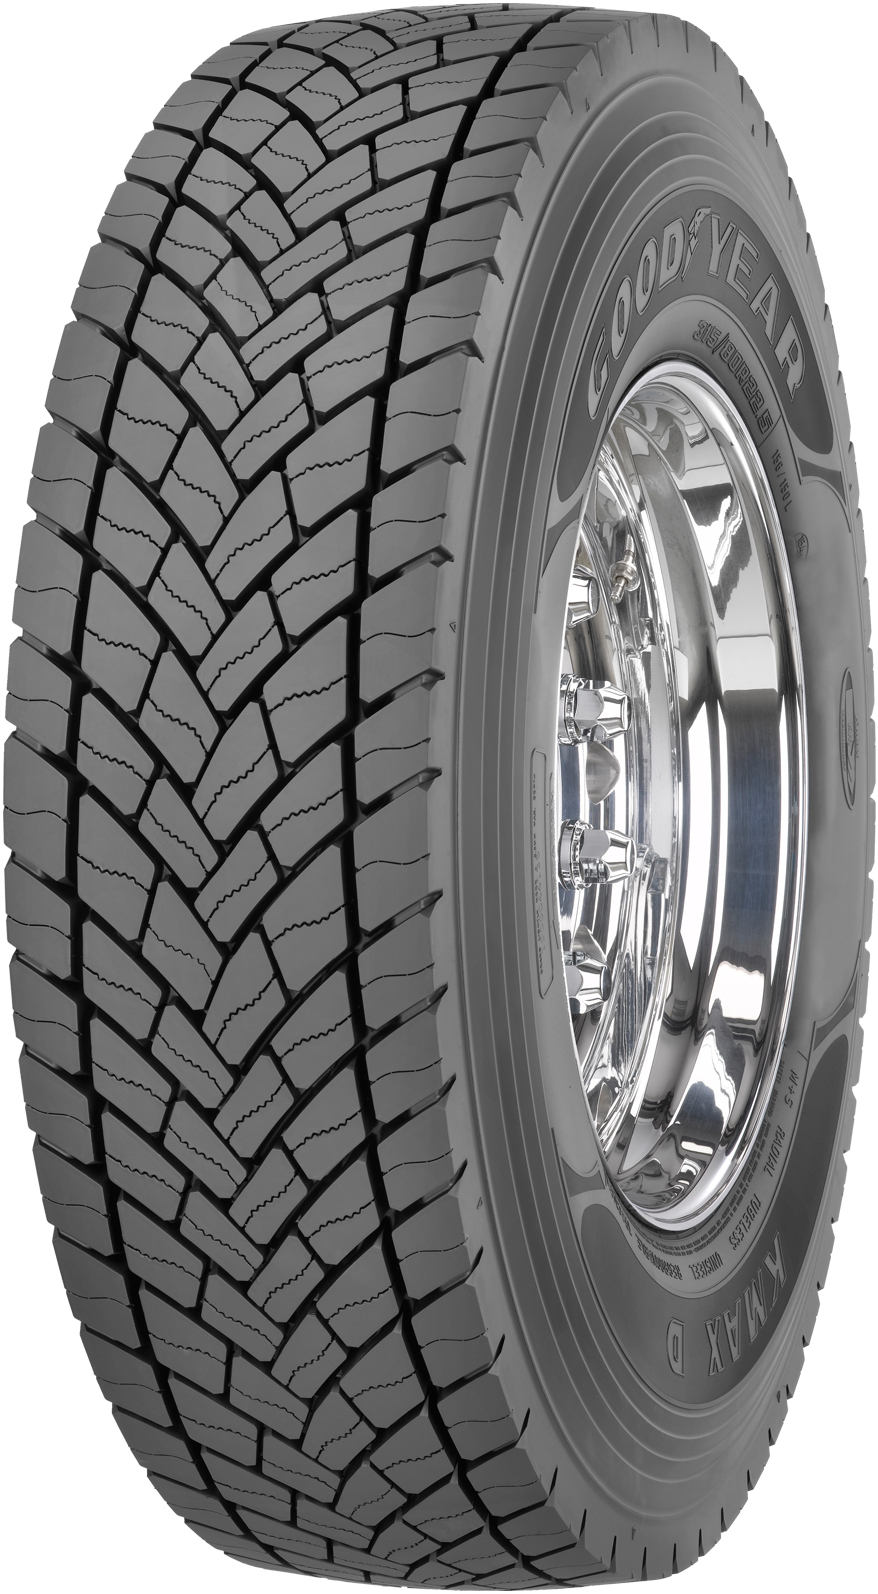 product_type-heavy_tires GOODYEAR KMAX D 3PMSF 215/75 R17.5 126M